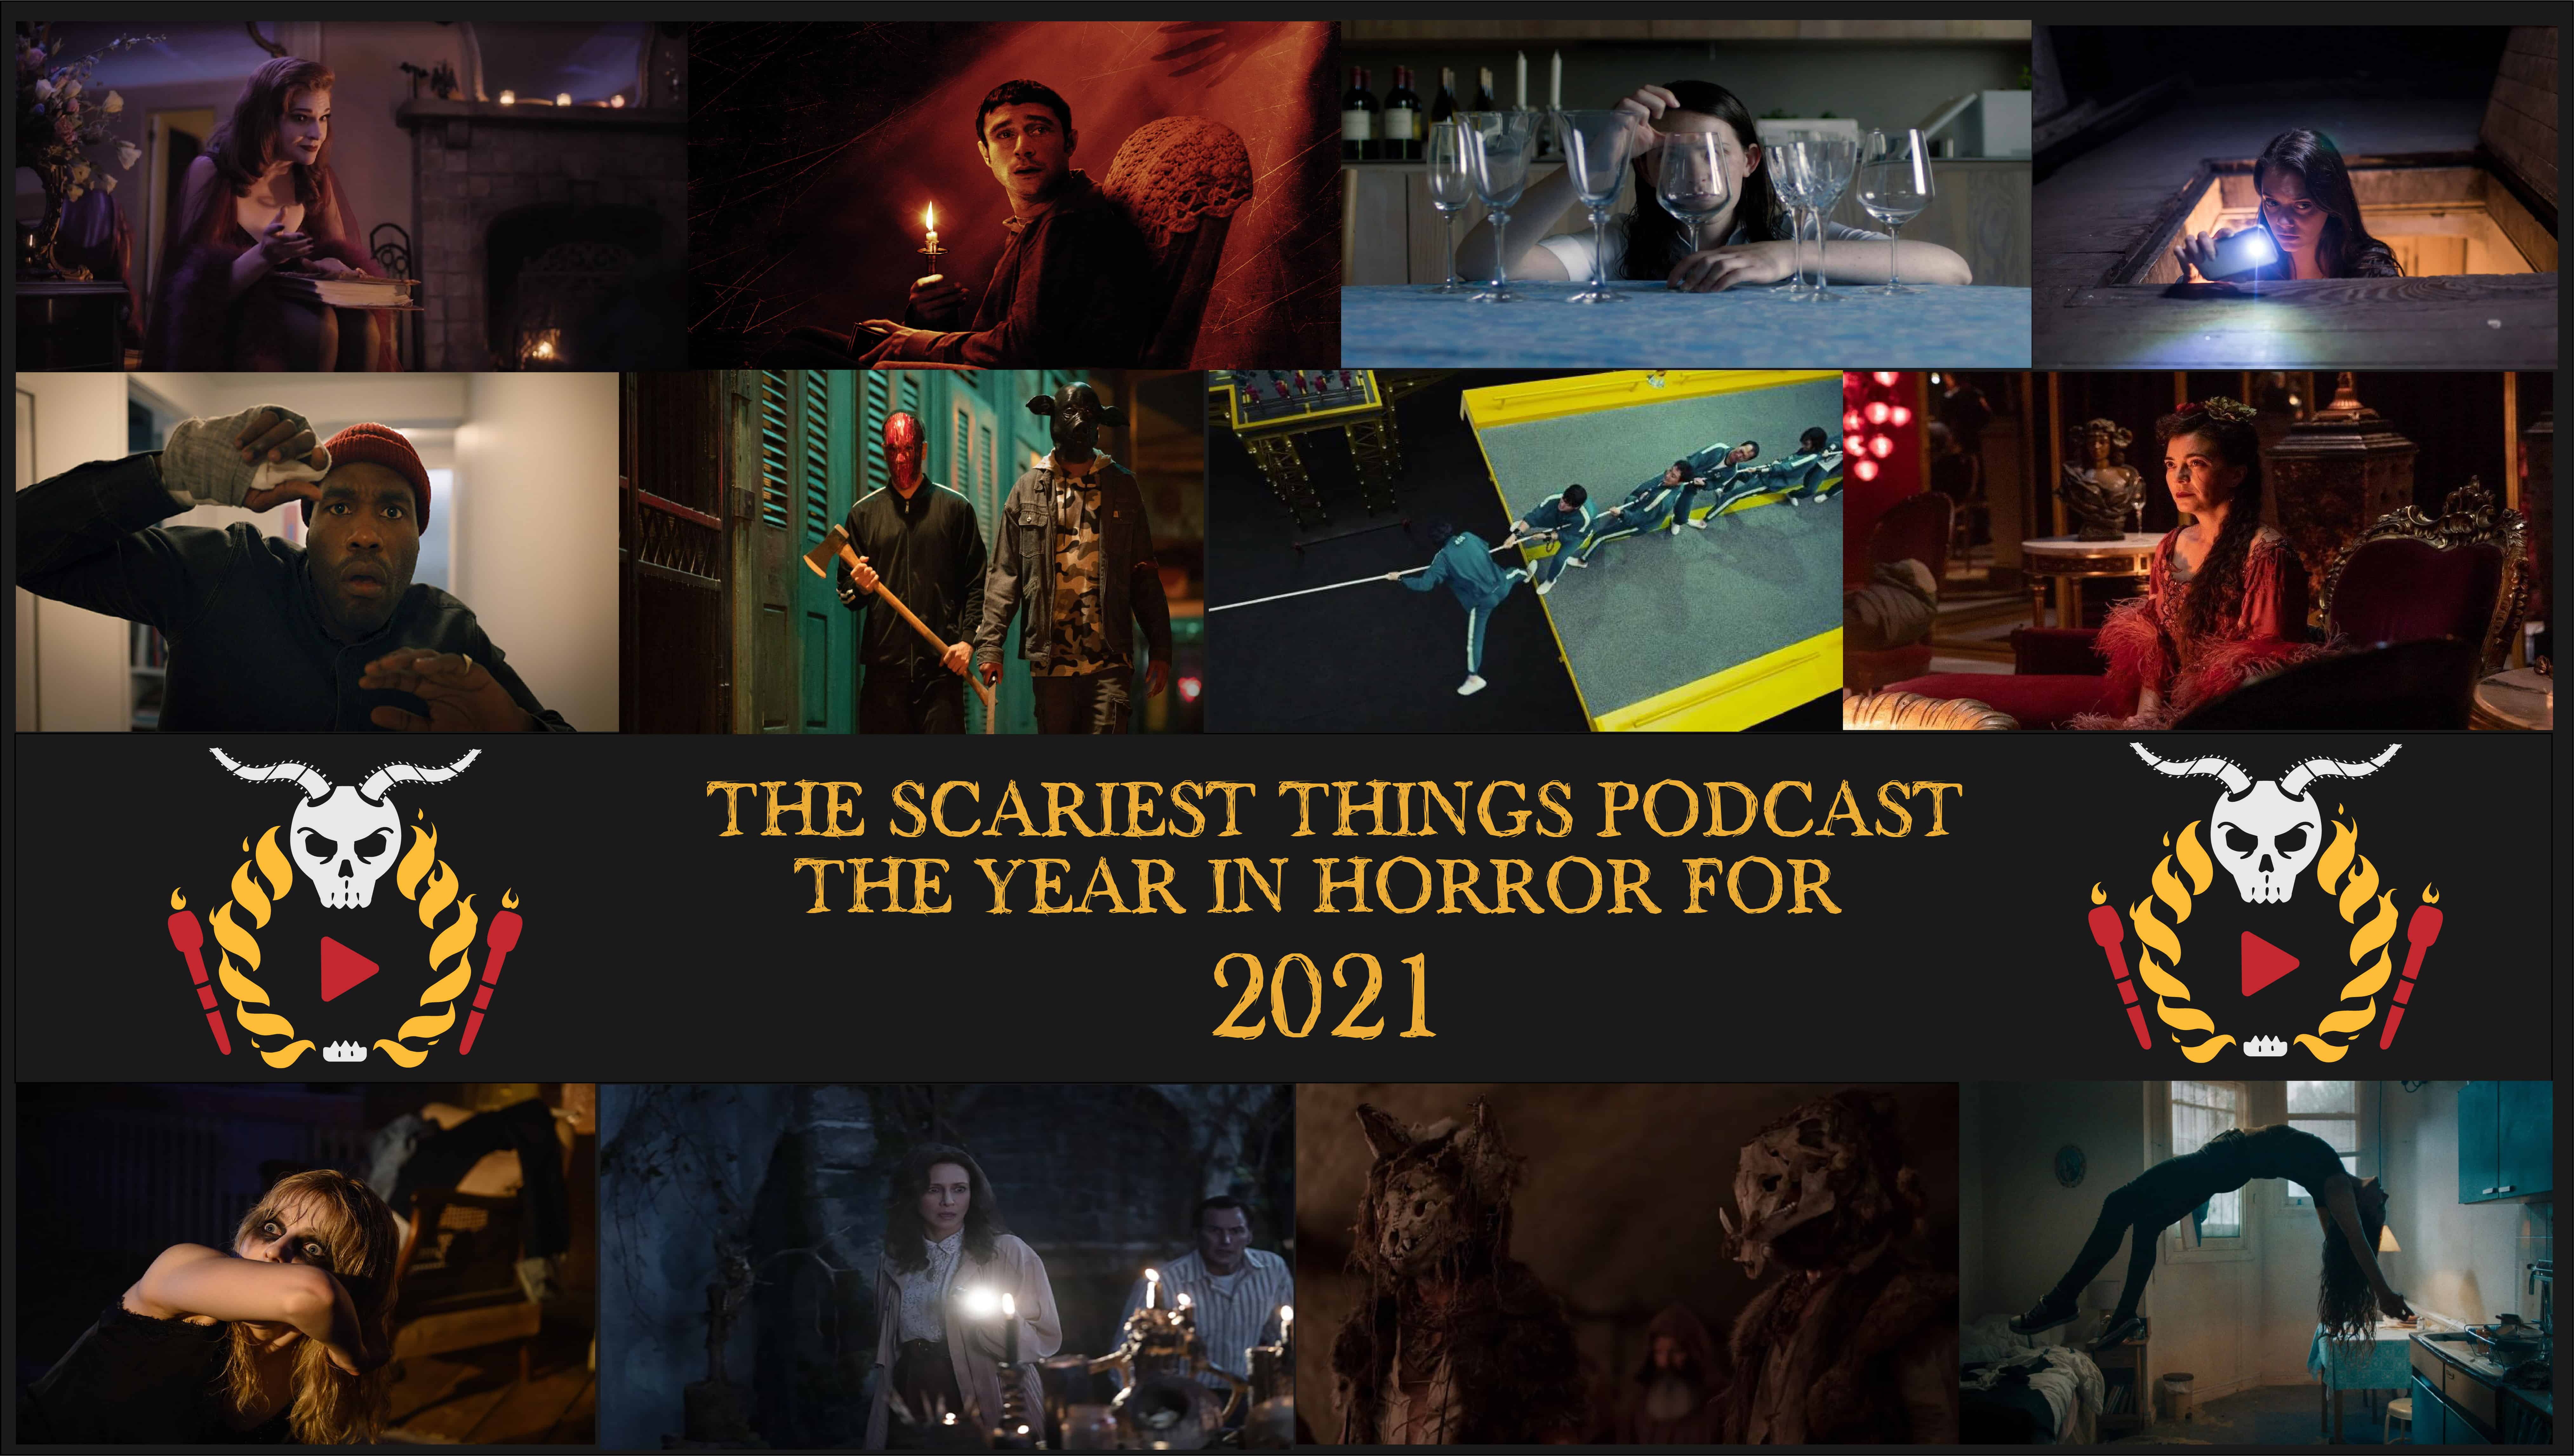 The Scariest Things Podcast Episode 138: The Best Horror Movies of 2021